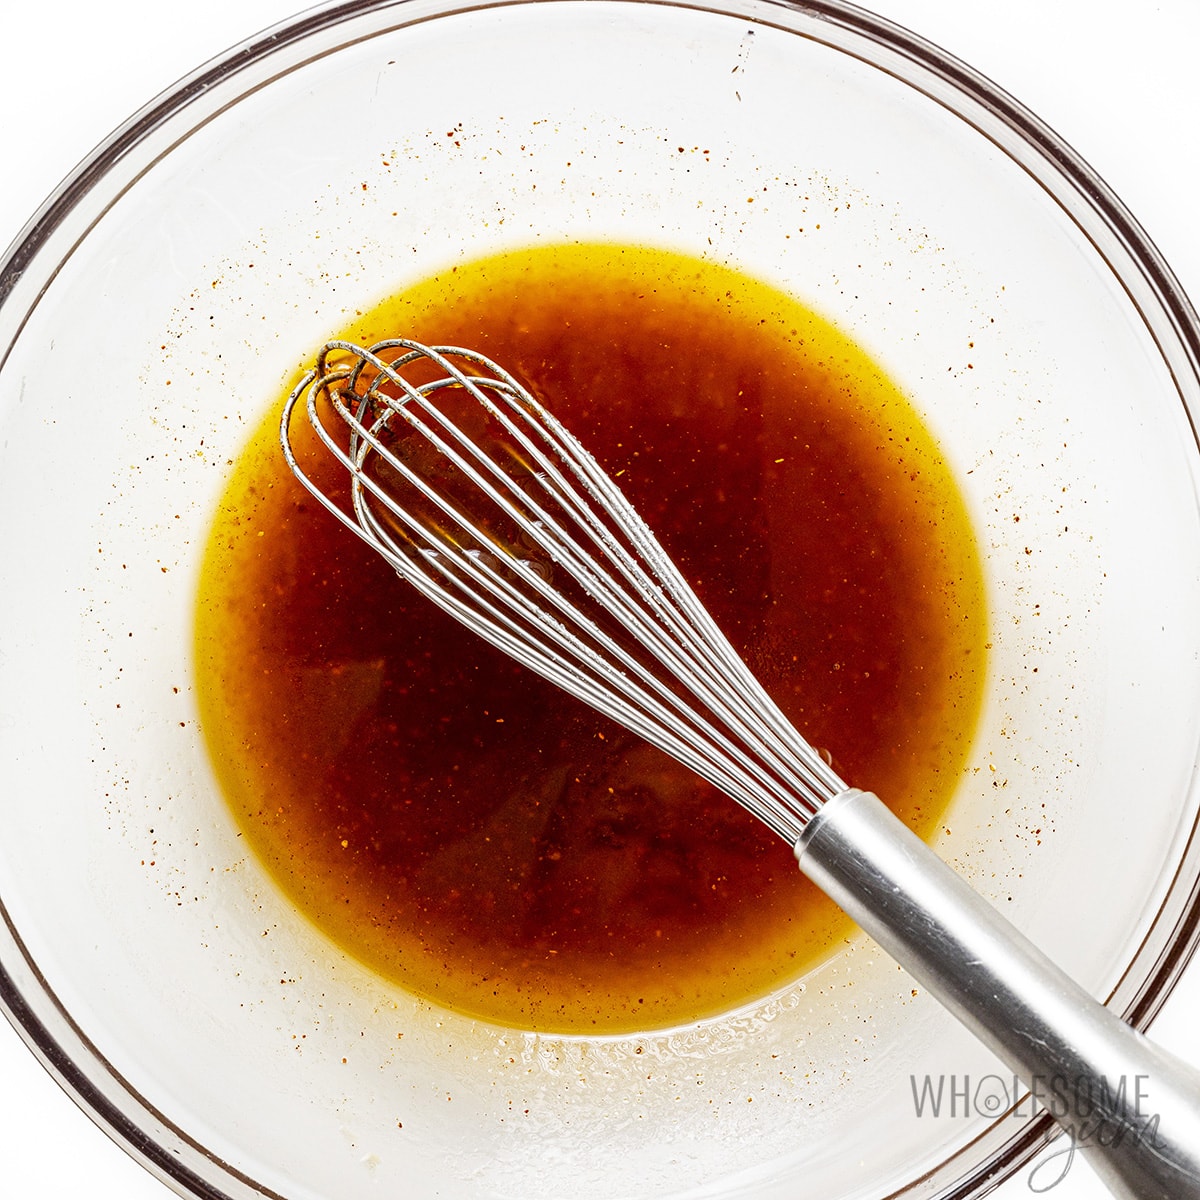 Marinade ingredients whisked together in a bowl.